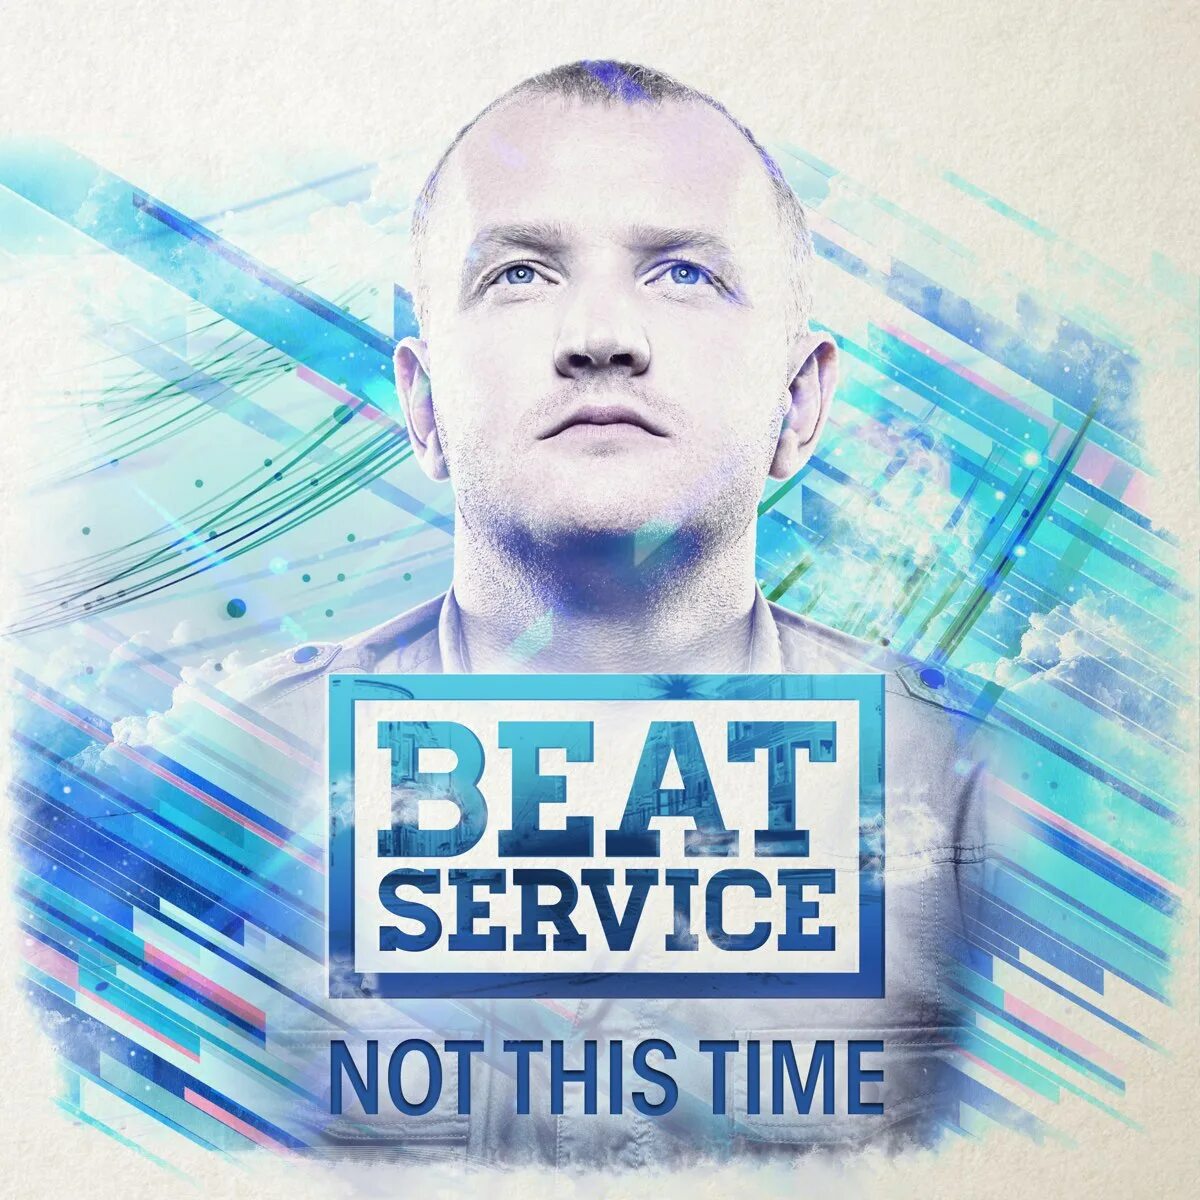 Beat service. Beat service - Aurora. Beat service - but i did - Extended. Beat service - Focus. Not this time.